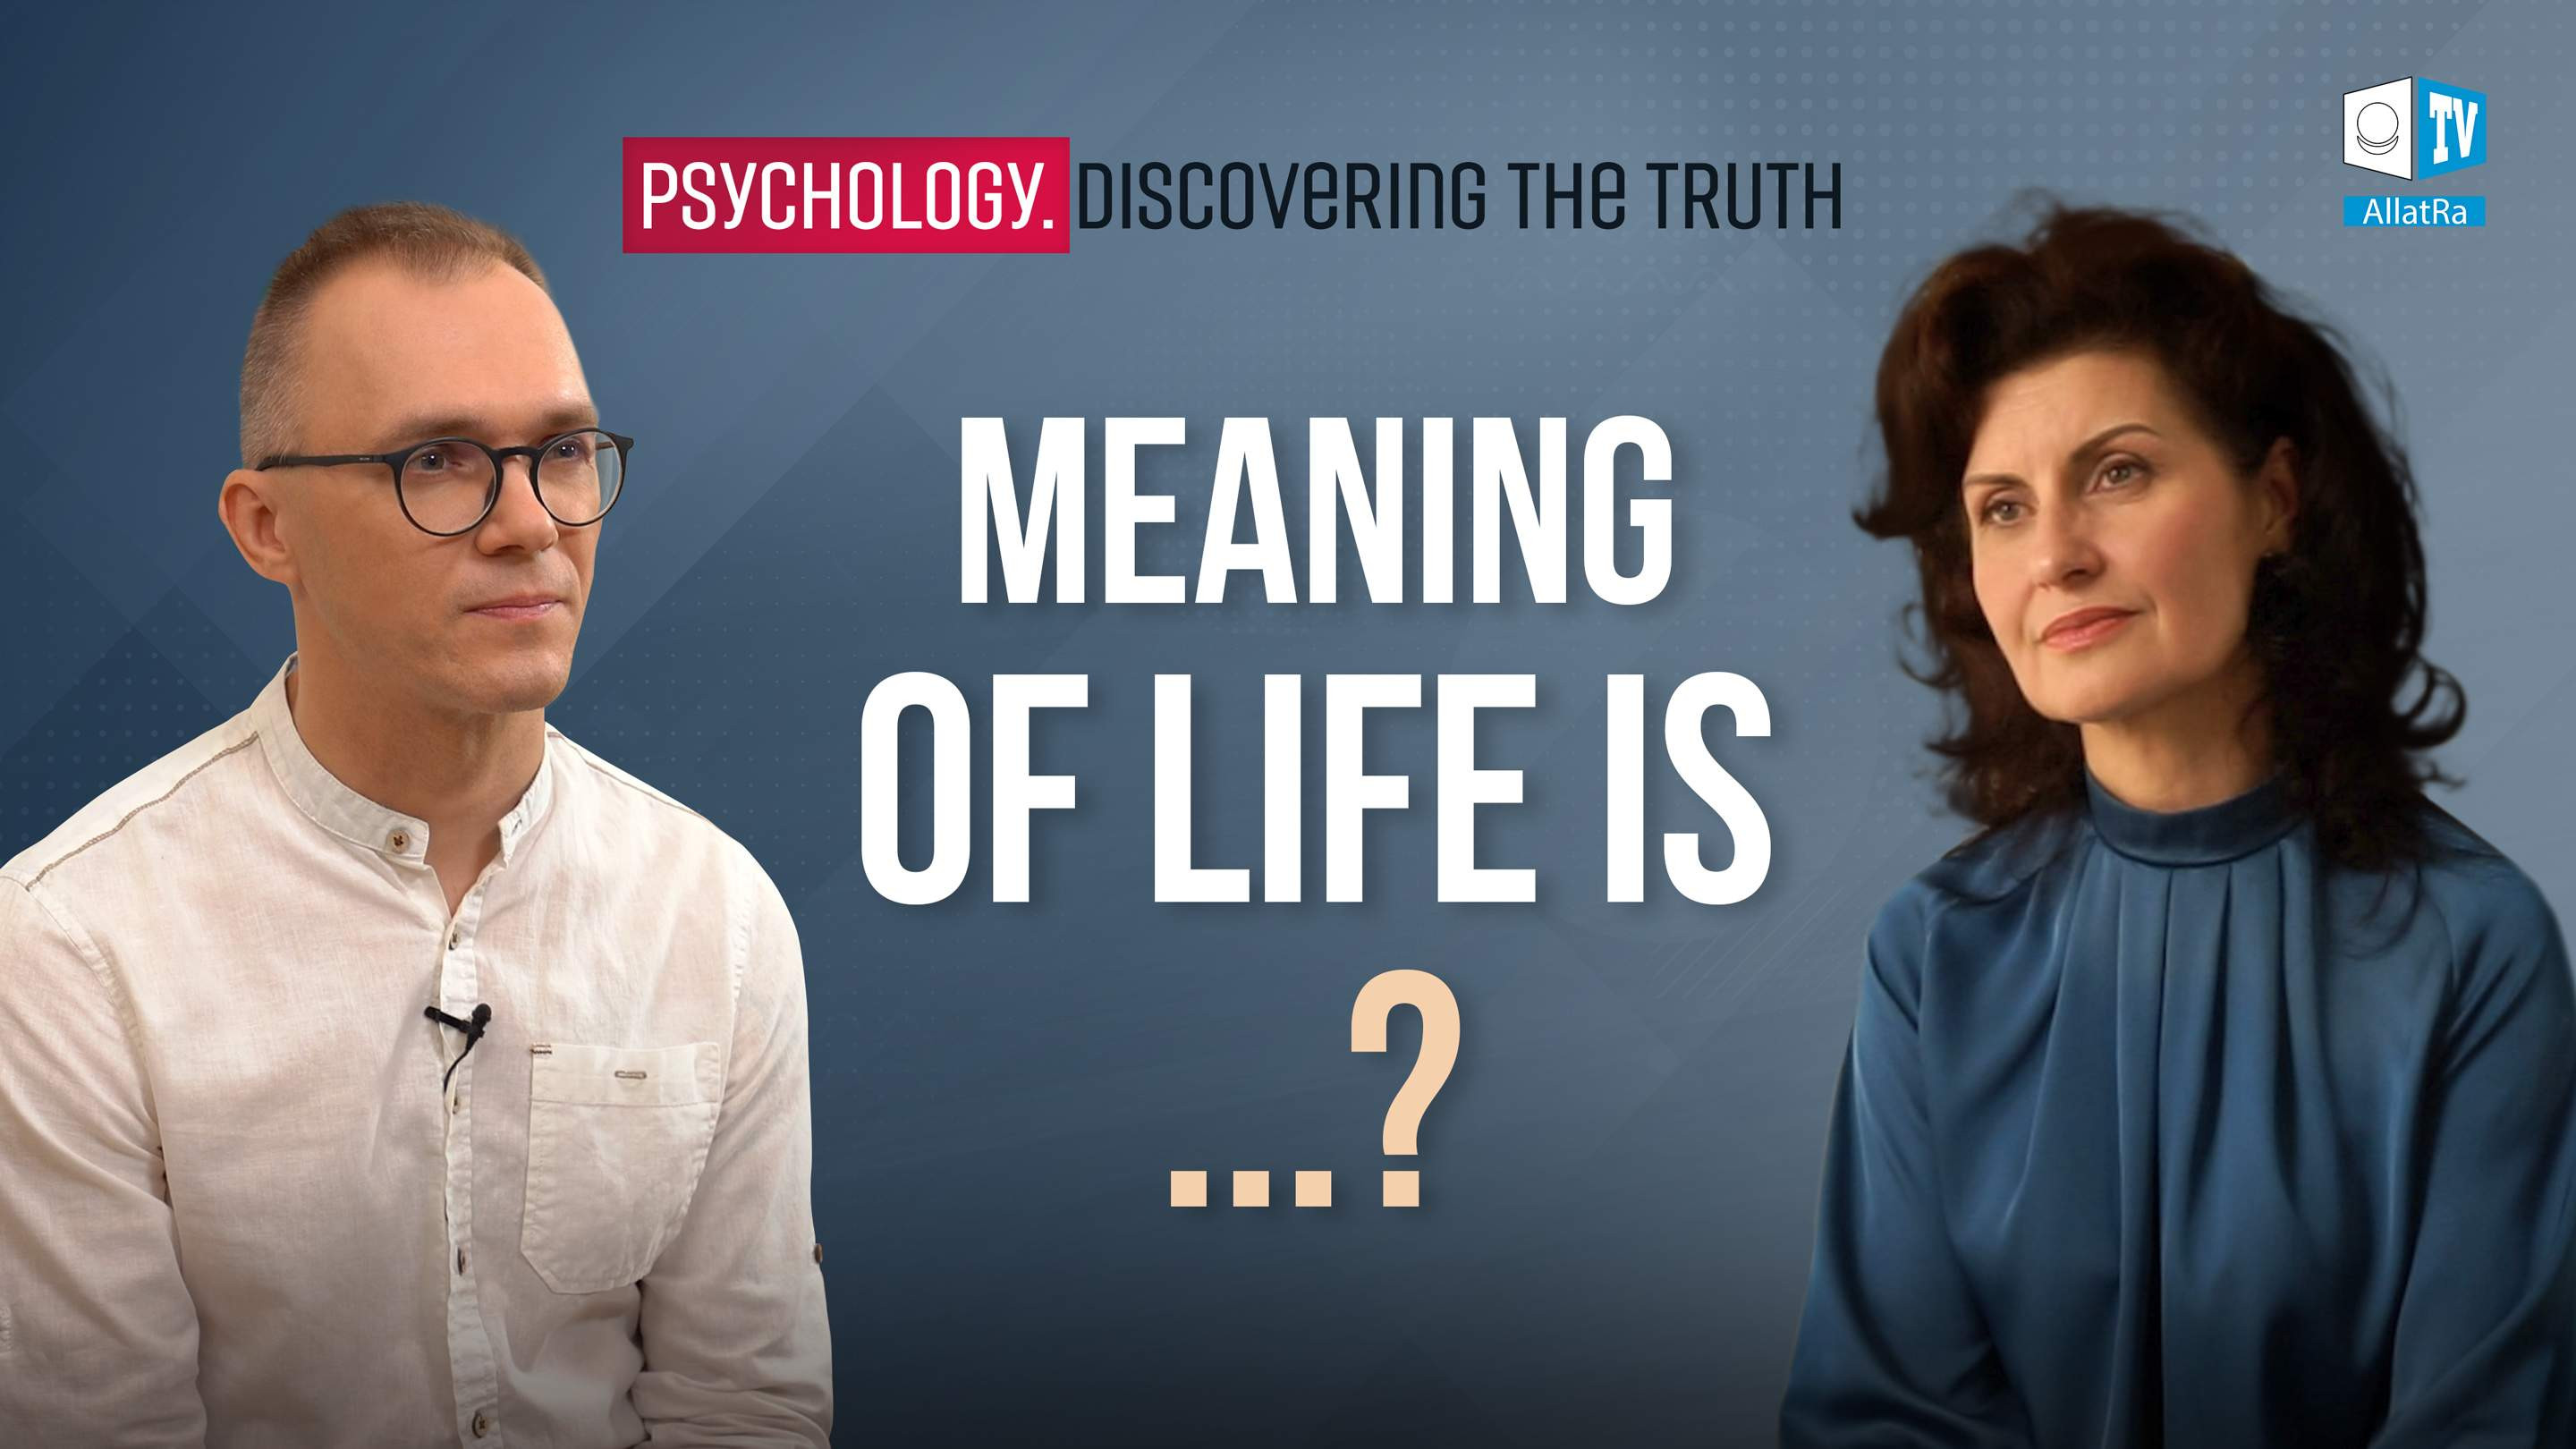 Loss of the Meaning of Life. Psychology. Discovering the Truth